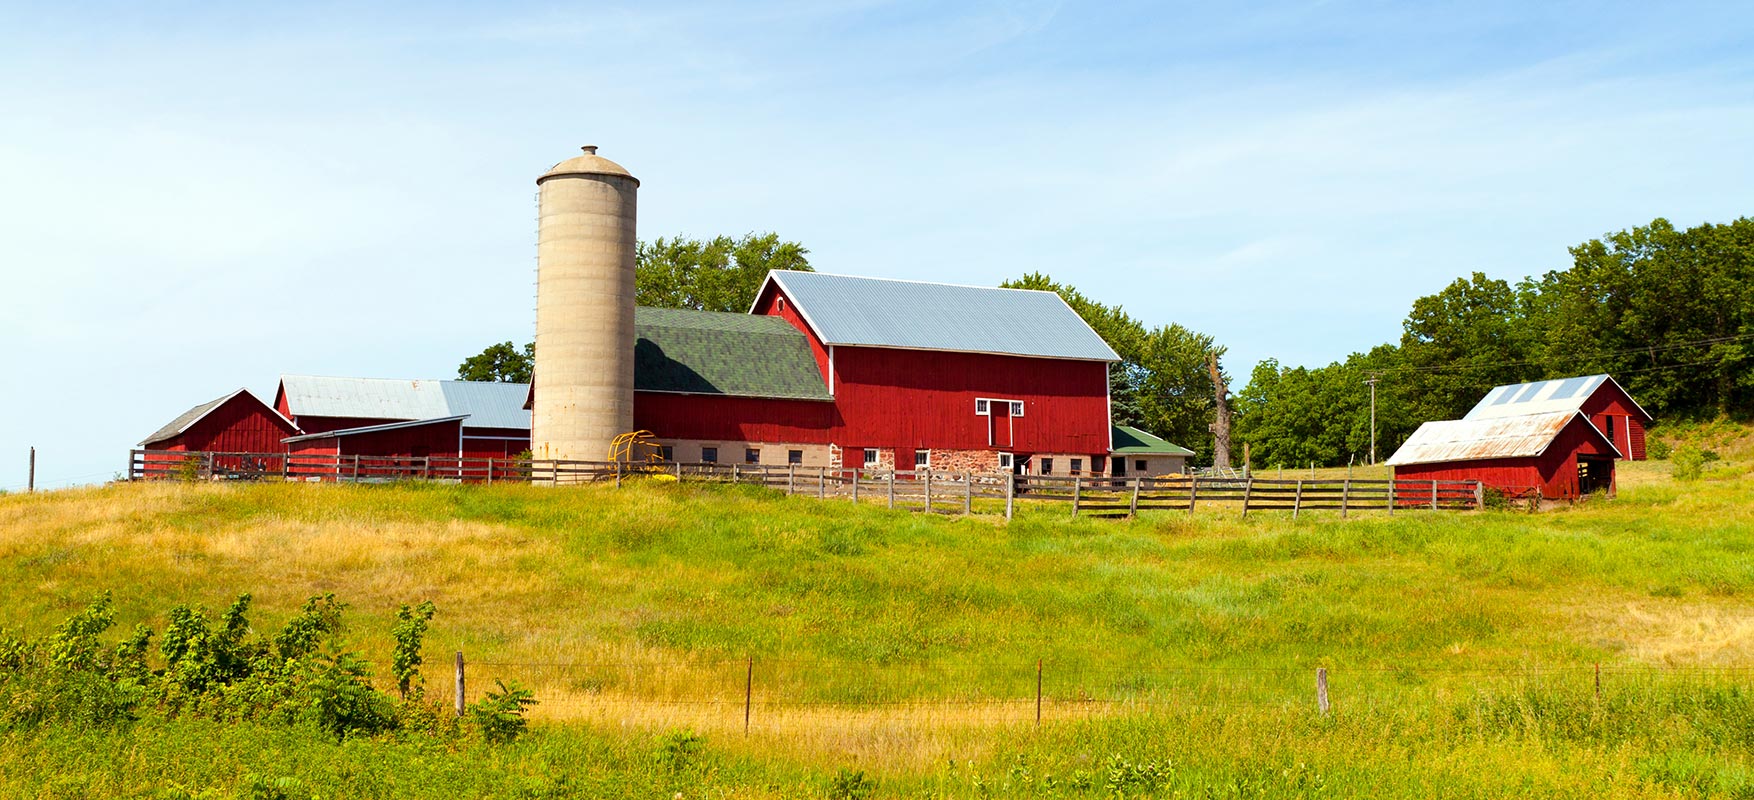 Barn with silo on hill